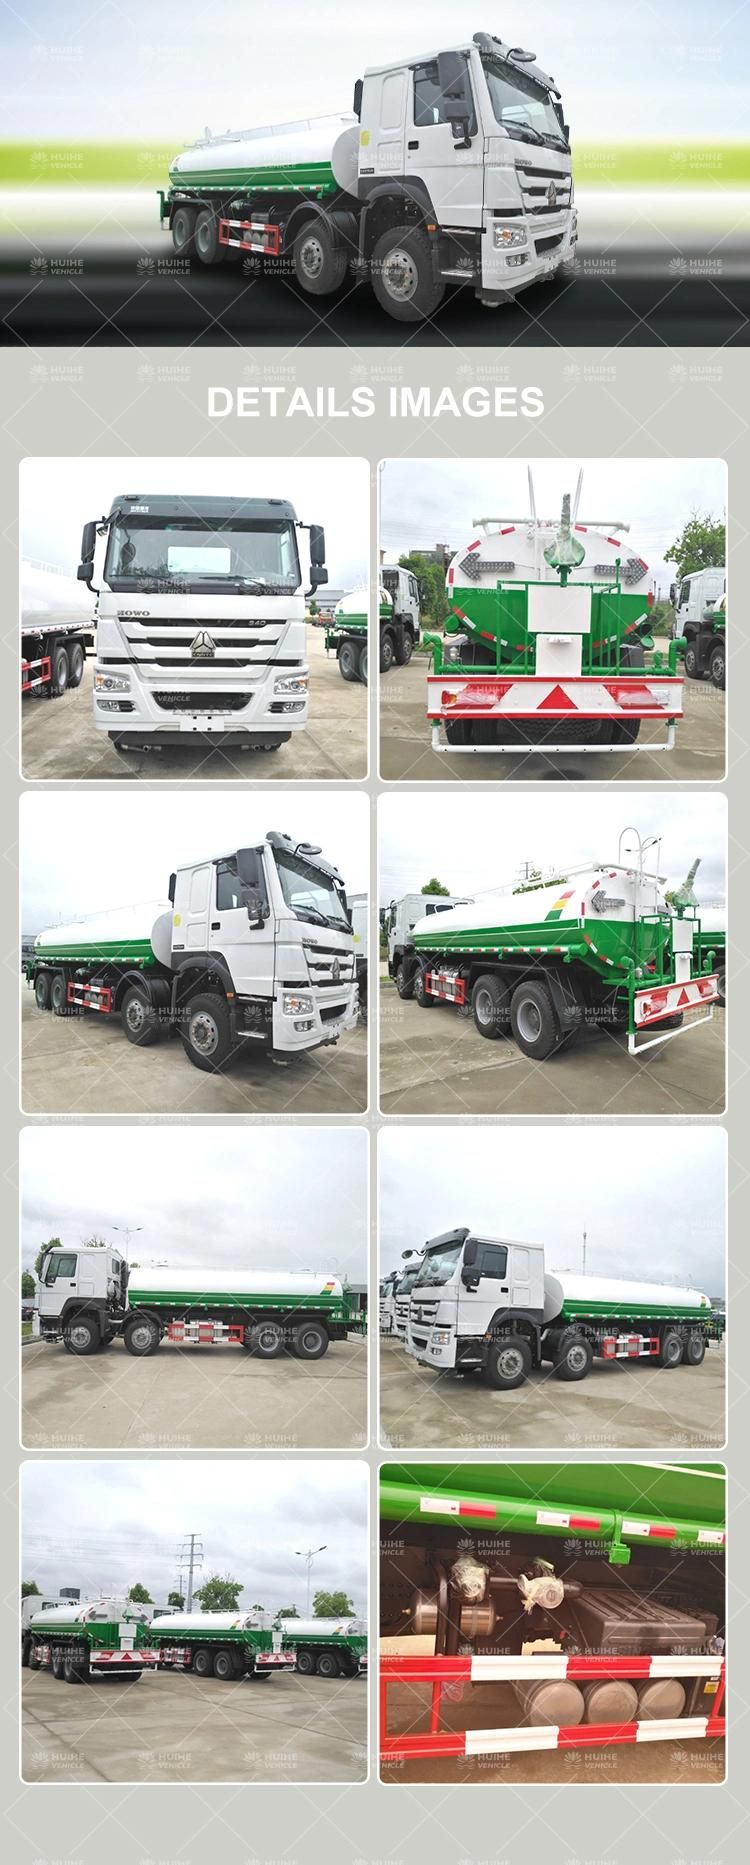 Sinotruk HOWO Used Water Tanker Trucks 20000L Used Tanker From China